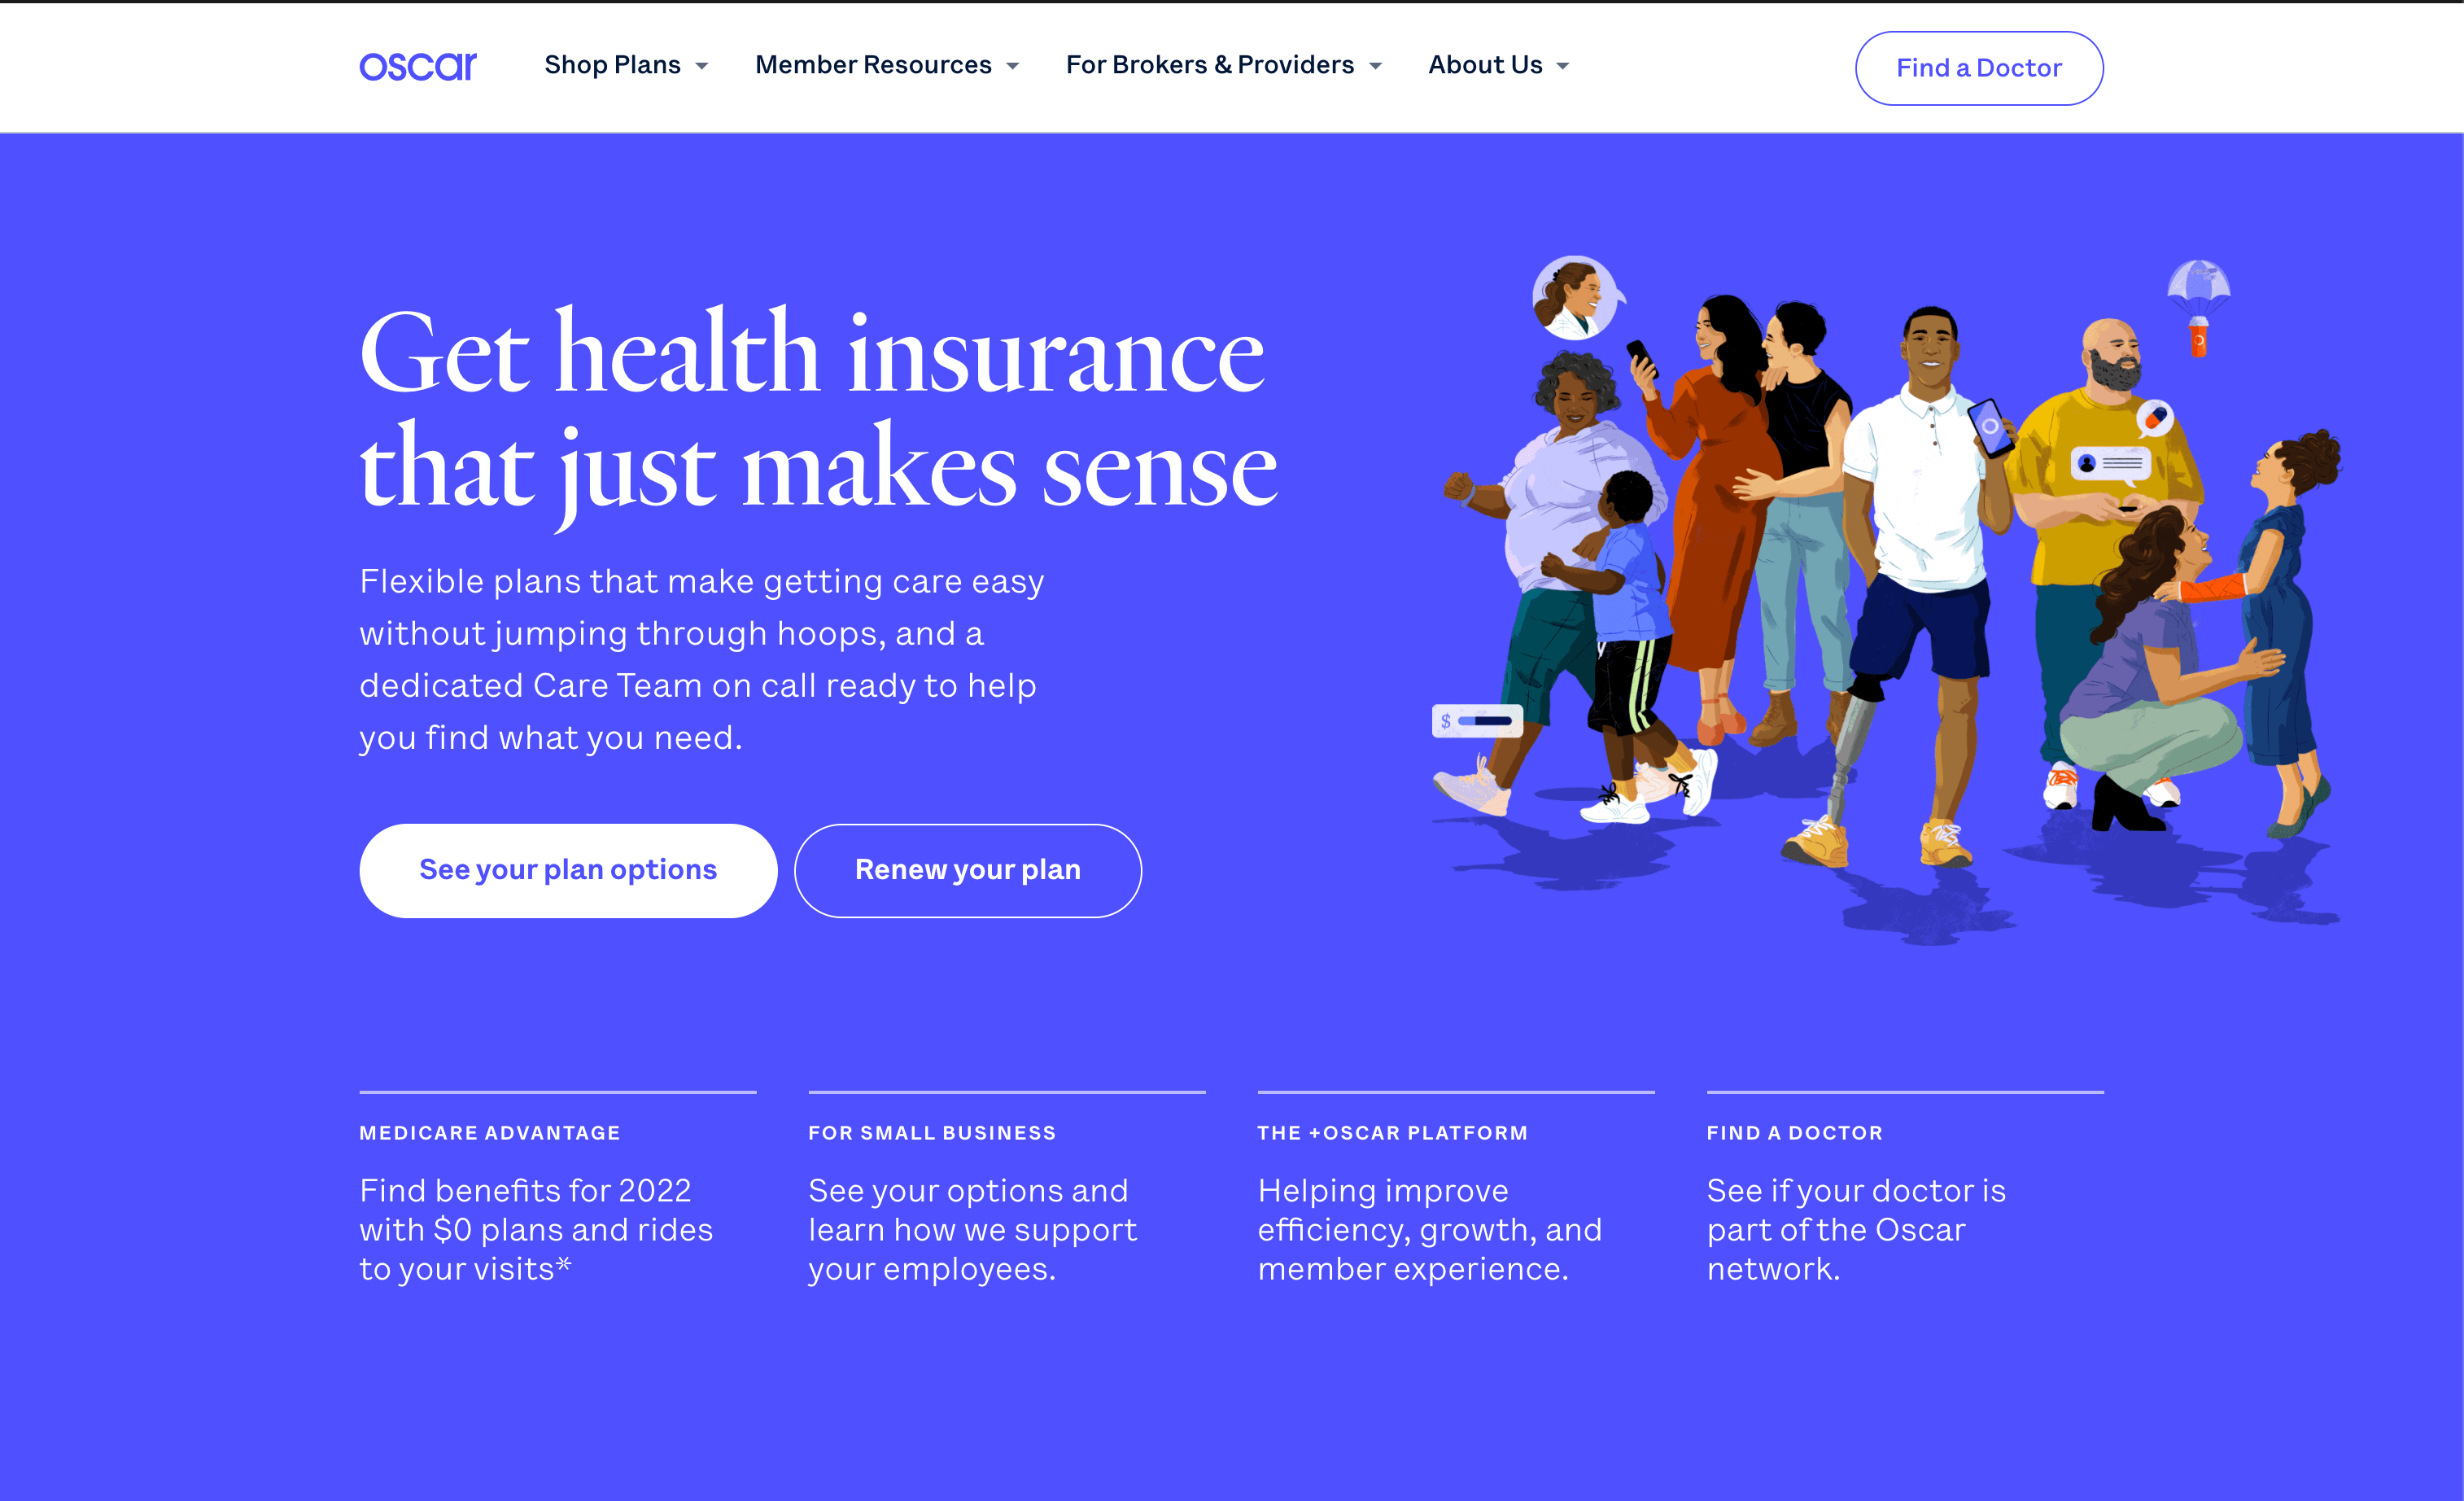 The homepage for Oscar insurance